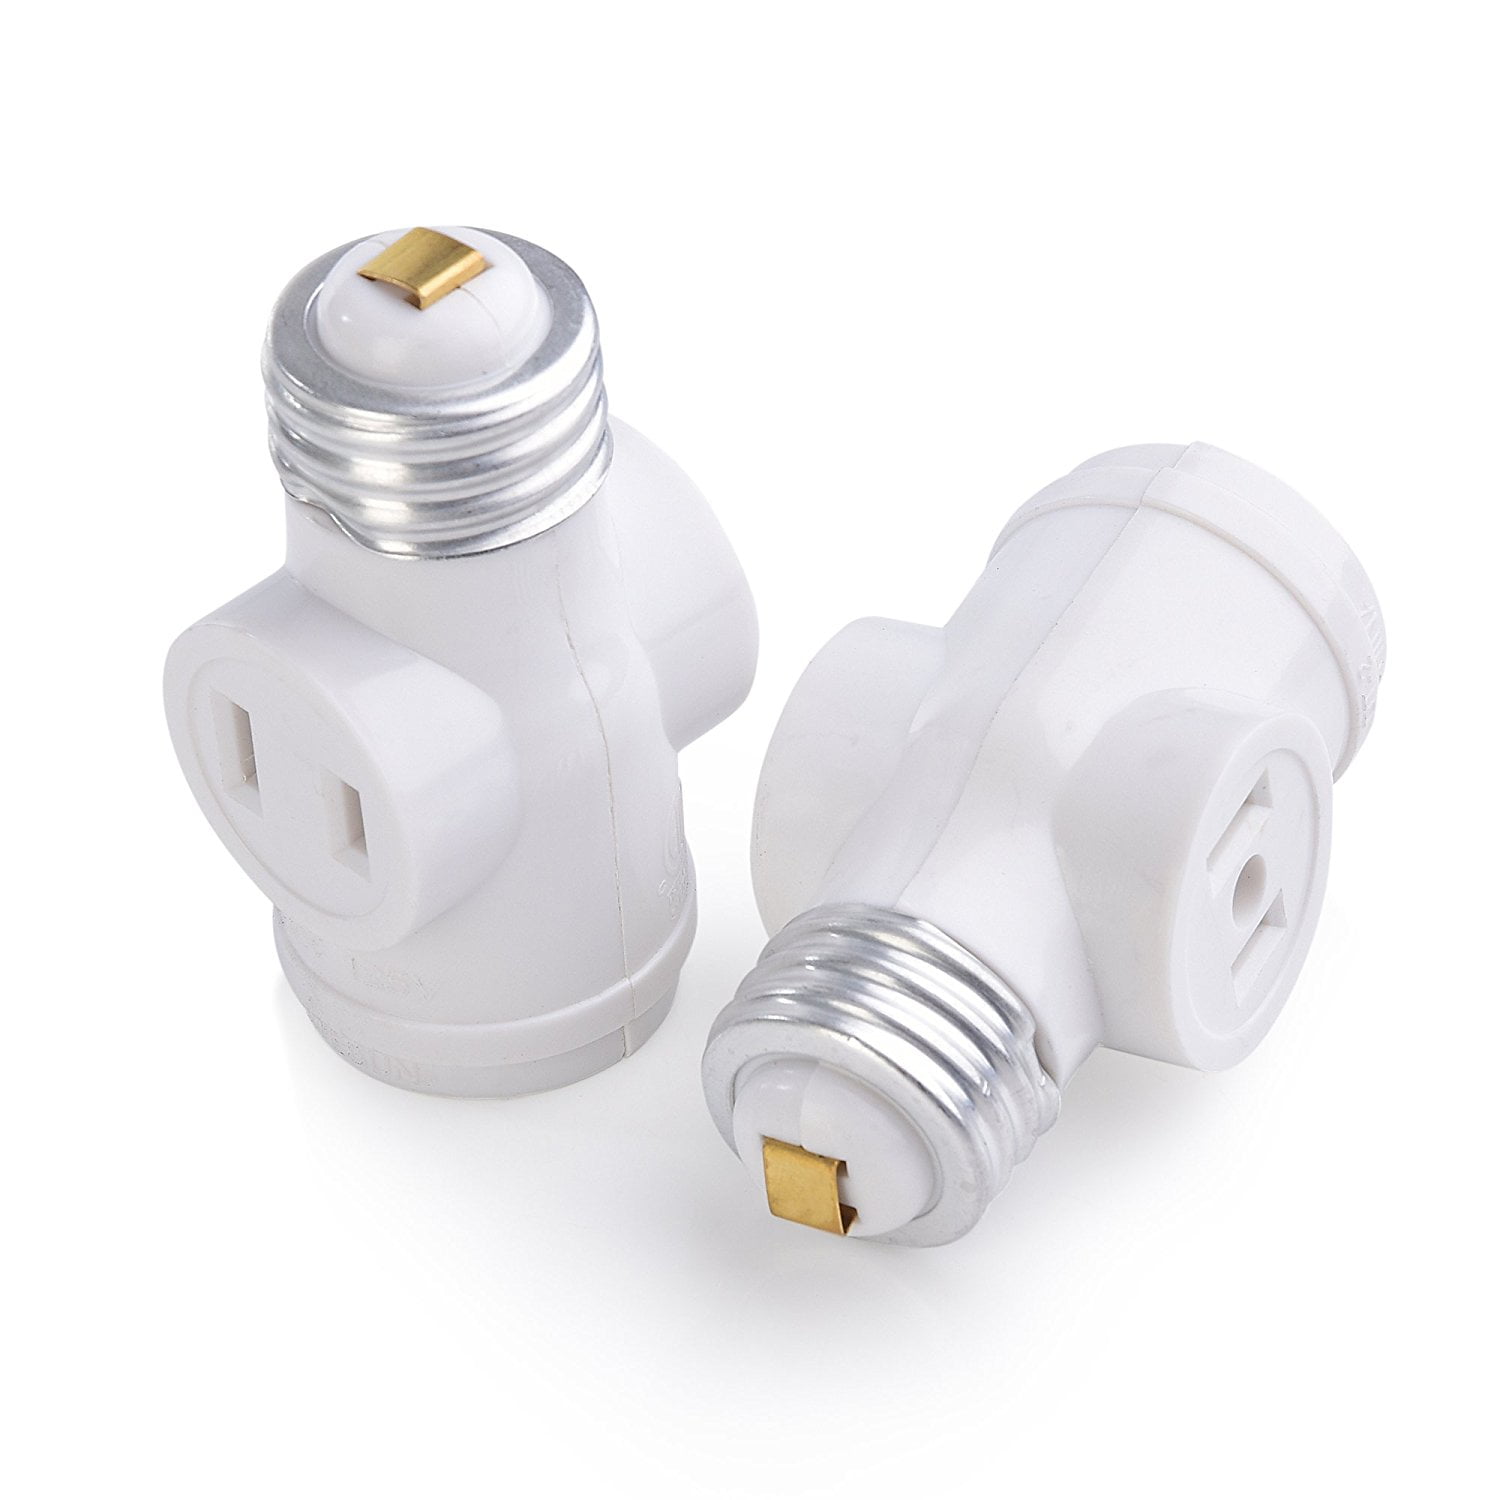 Cable Matters 2-Pack Light Socket Adapter with 2X AC Outlets in White 400022 Light Bulb Socket Outlet